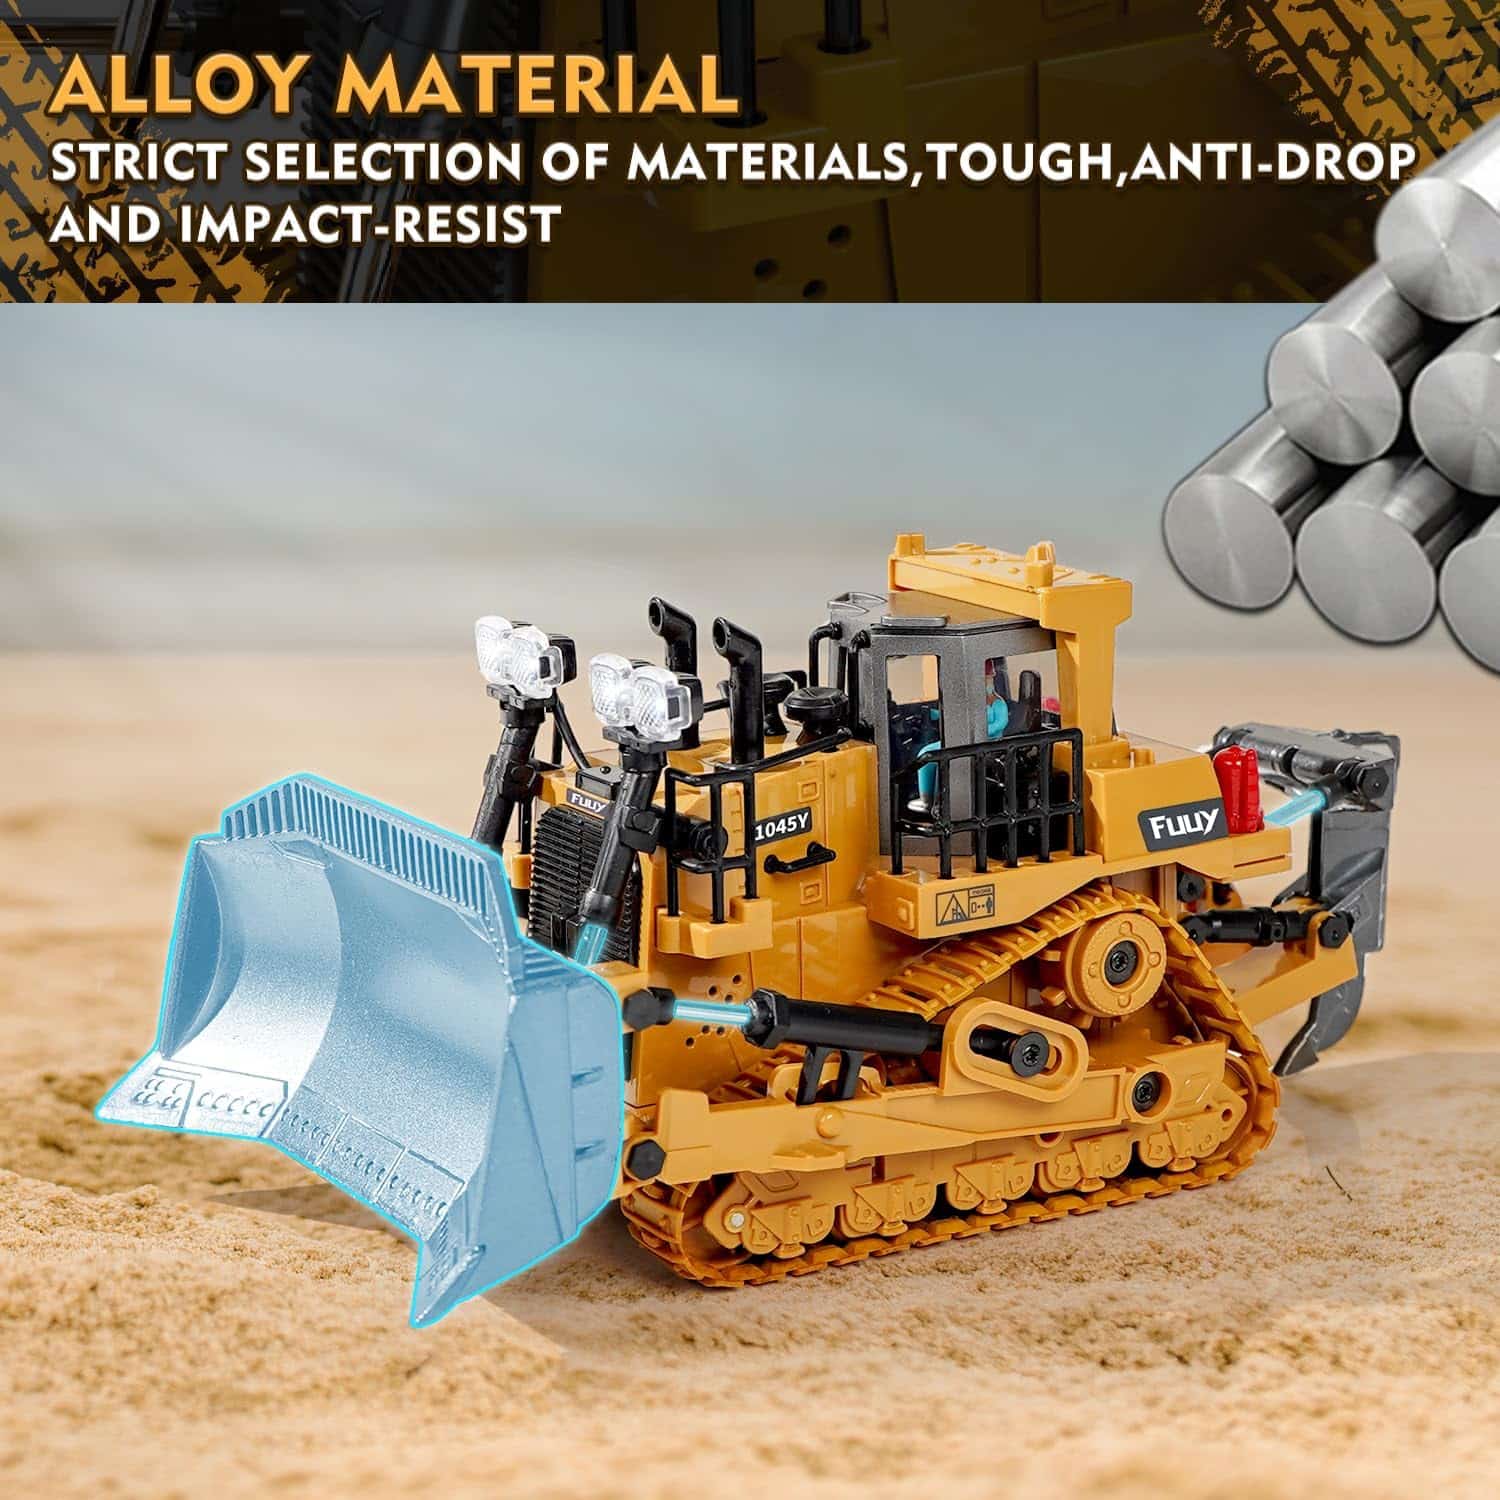 FUUY Construction Toys for 3 Year Old Boys: A Realistic Remote Control Bulldozer Review